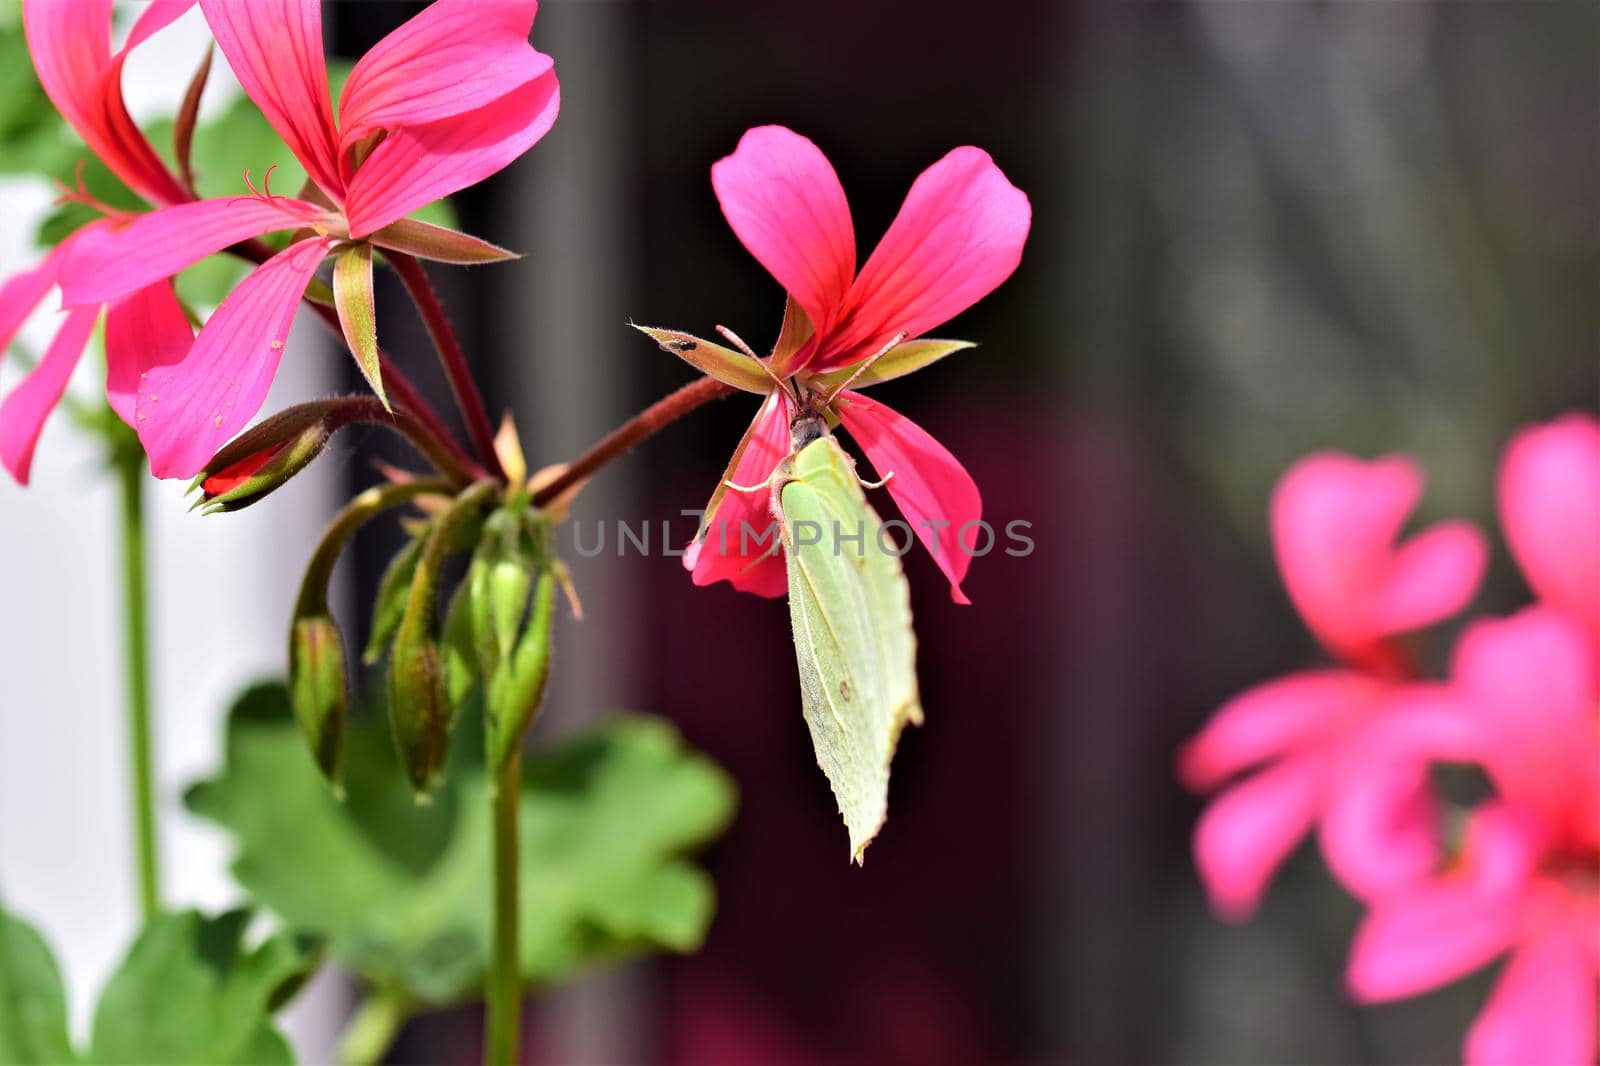 Pieris rapae - cabbage white butterfly at a pink geranium blossom as a closeup